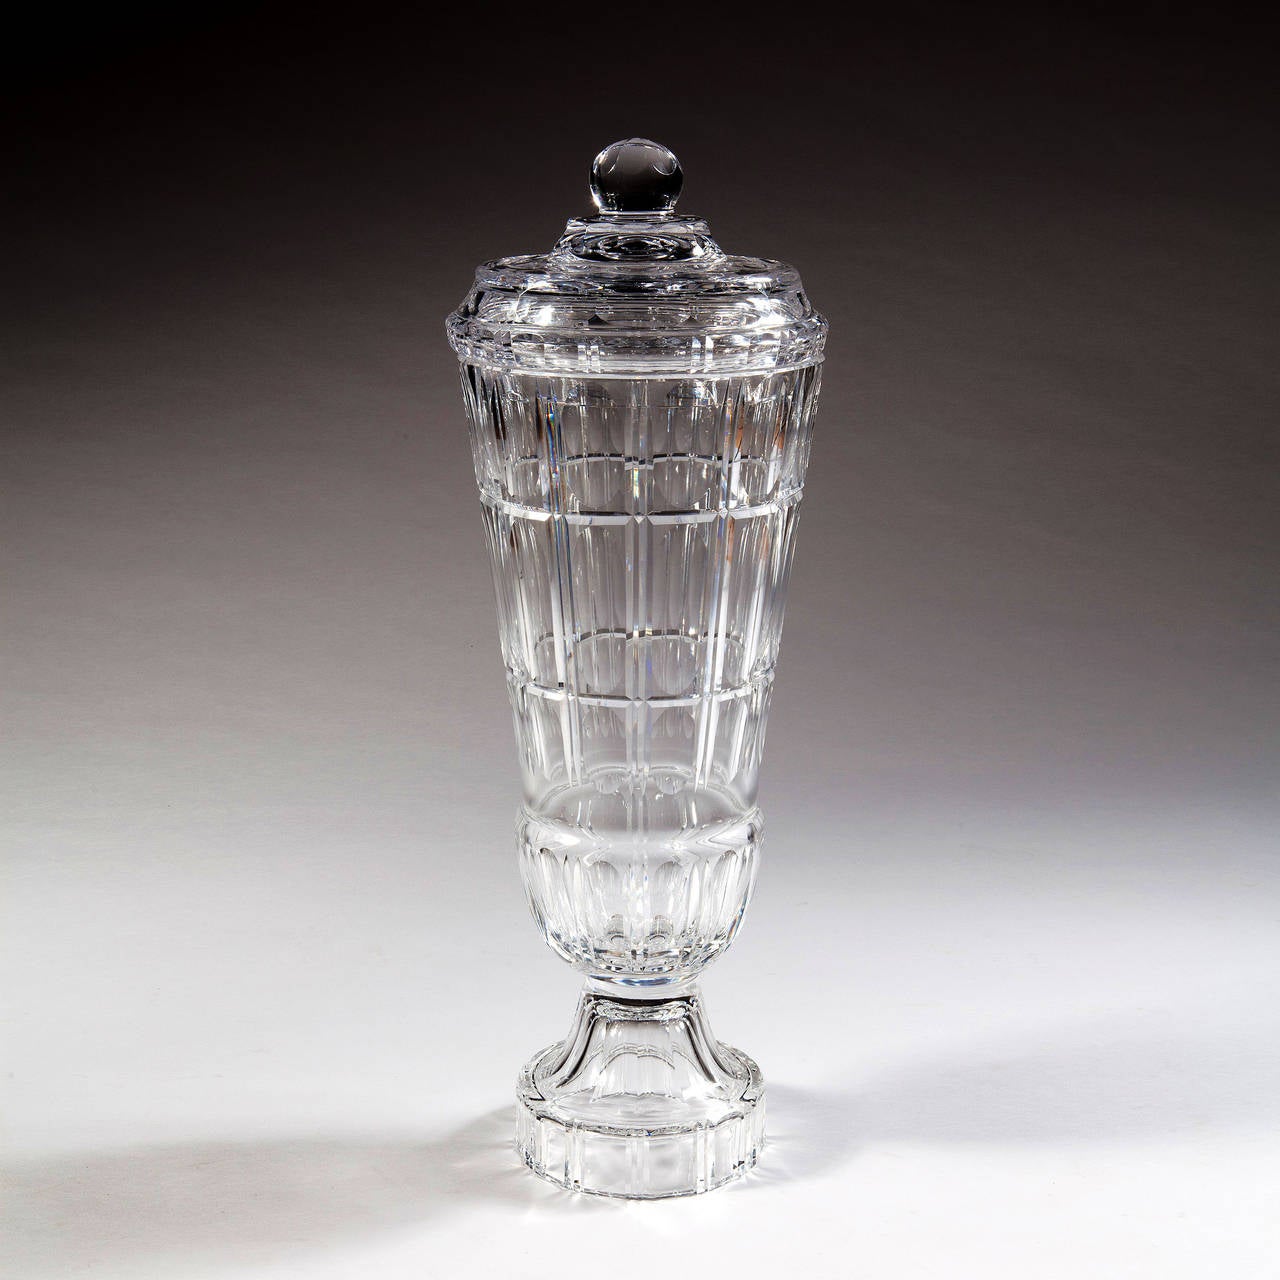 A very large scale Val Saint Lambert clear glass vase and cover. The sides and cover are cut with bold flutes, gashes and varying scale ovals. The cover terminates in a large ball finial. The base is a strongly fluted and facetted.